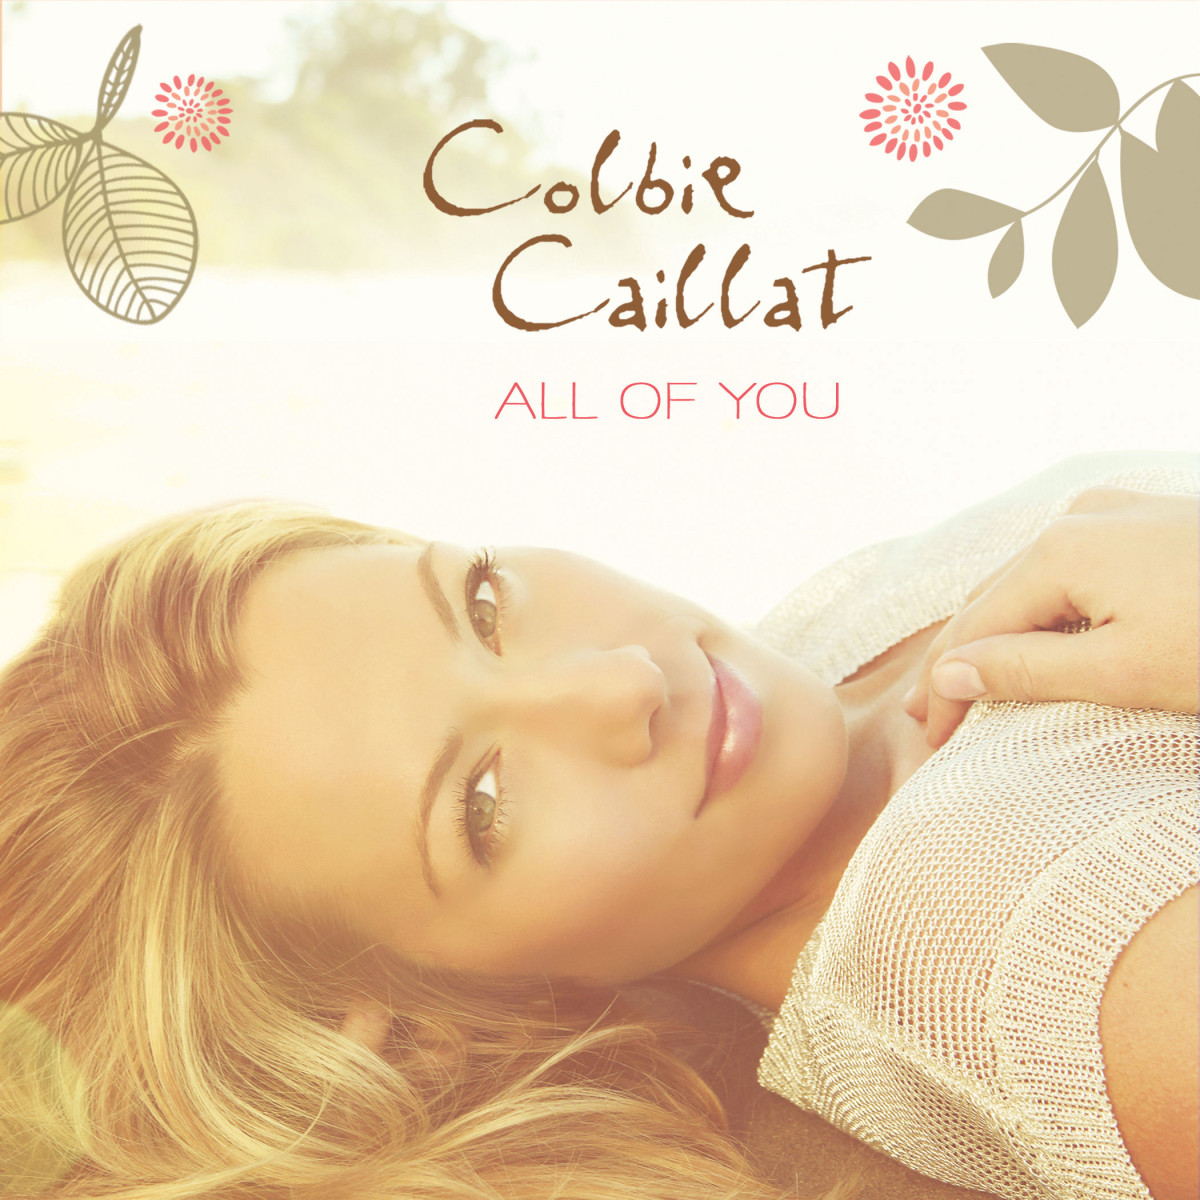 Colbie Caillat: pic #825084